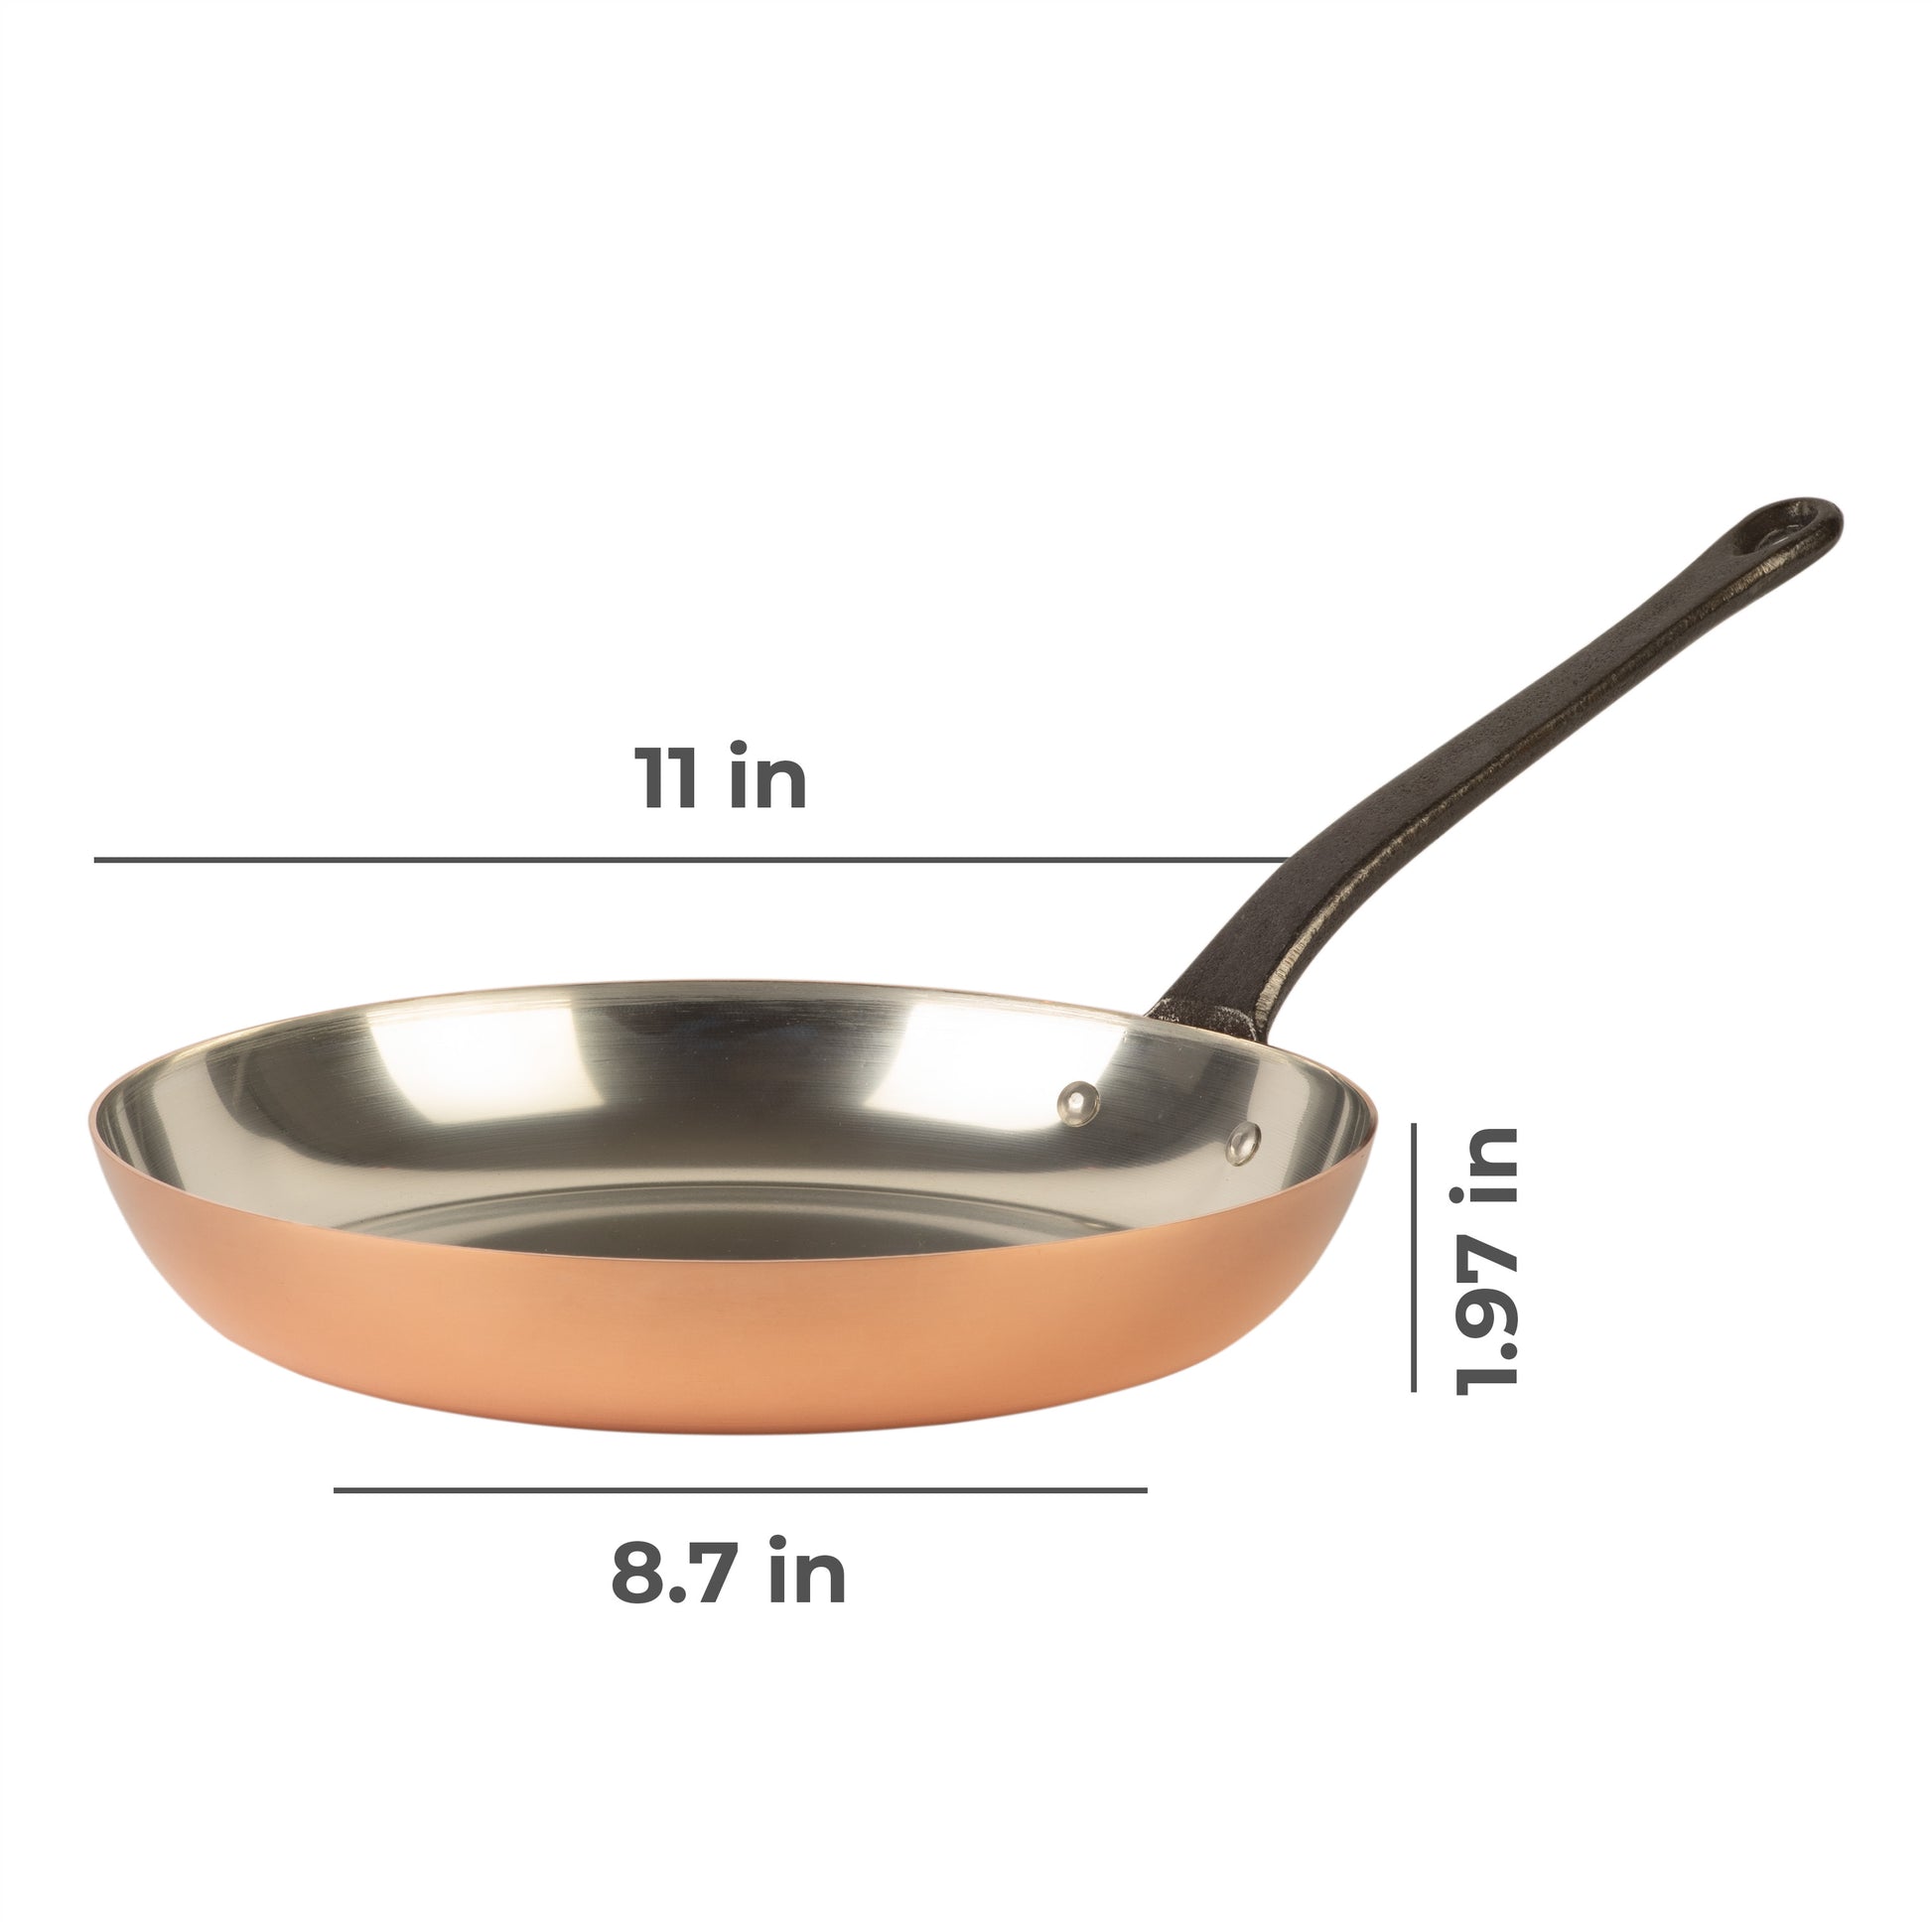 28-centimeter frying pan made of copper and stainless steel from